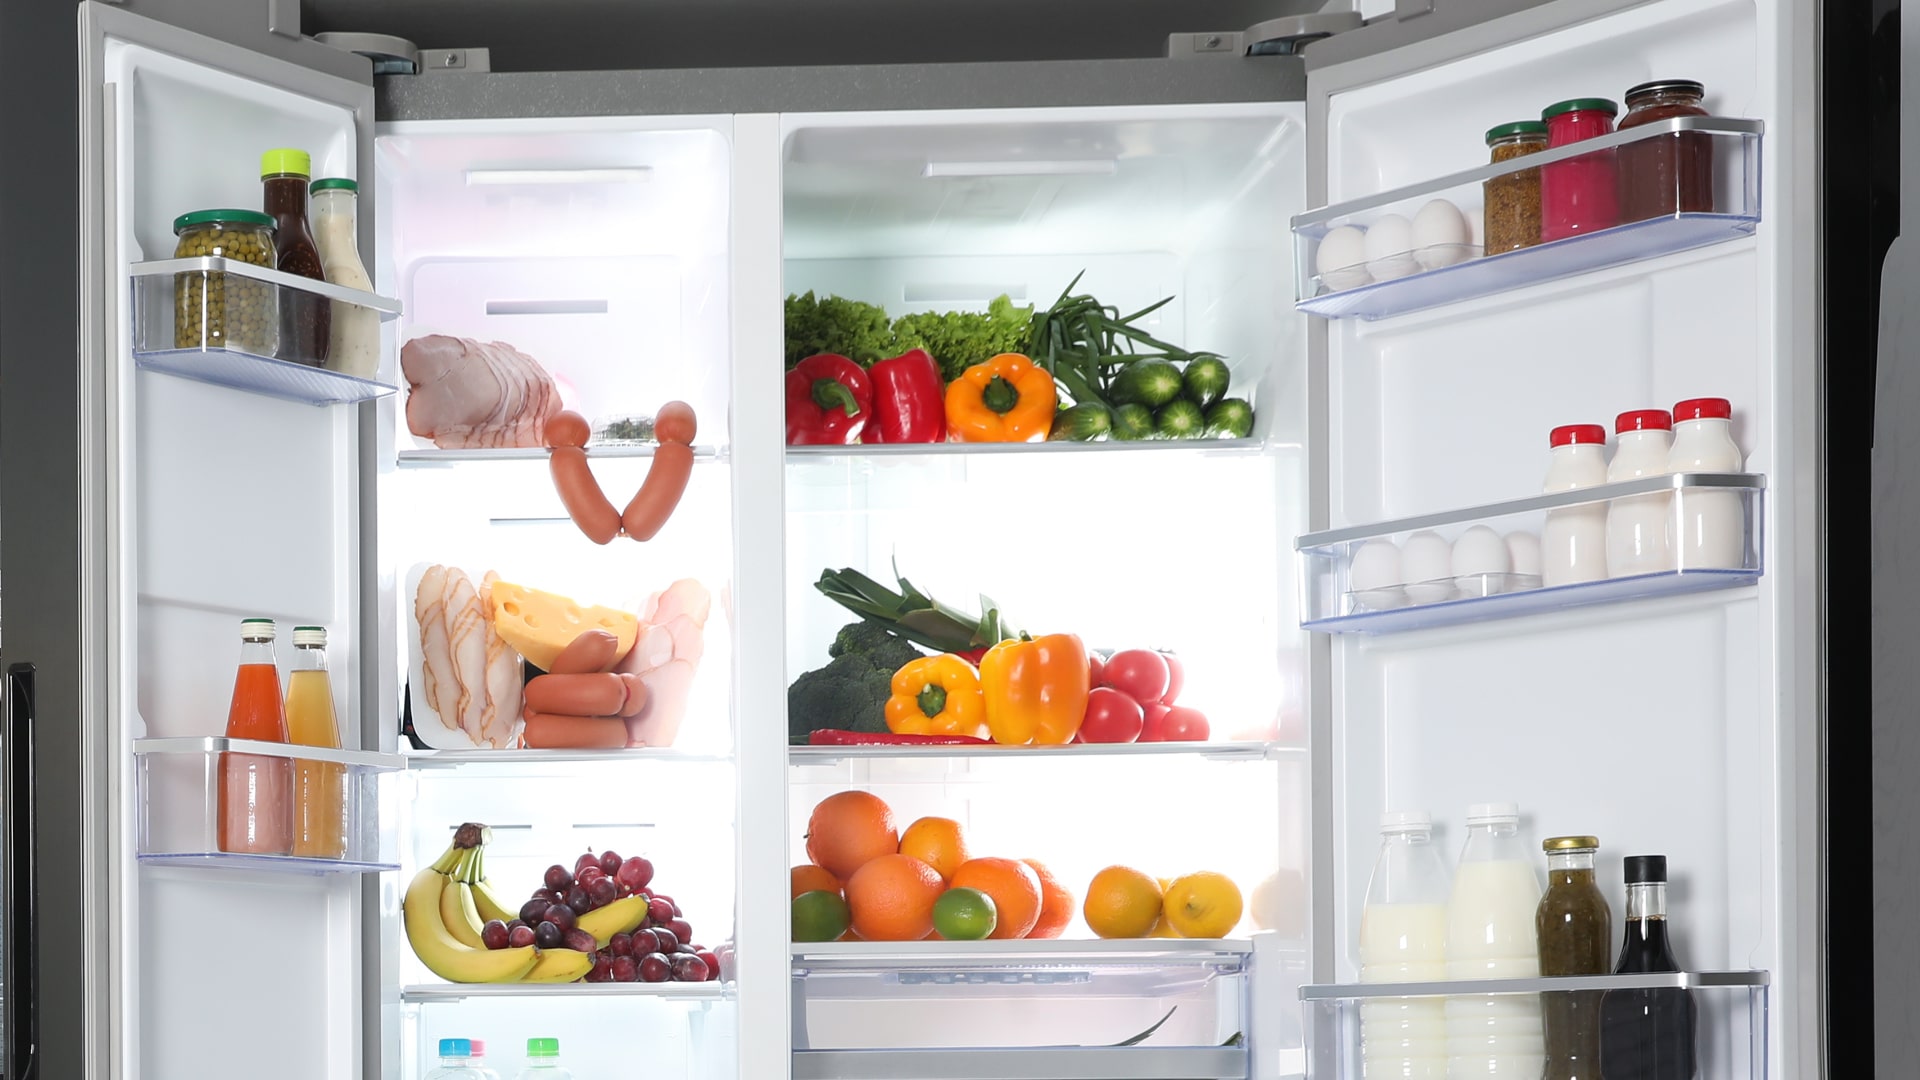 Featured image for “How To Organize Your Fridge So Food Keeps Longer”